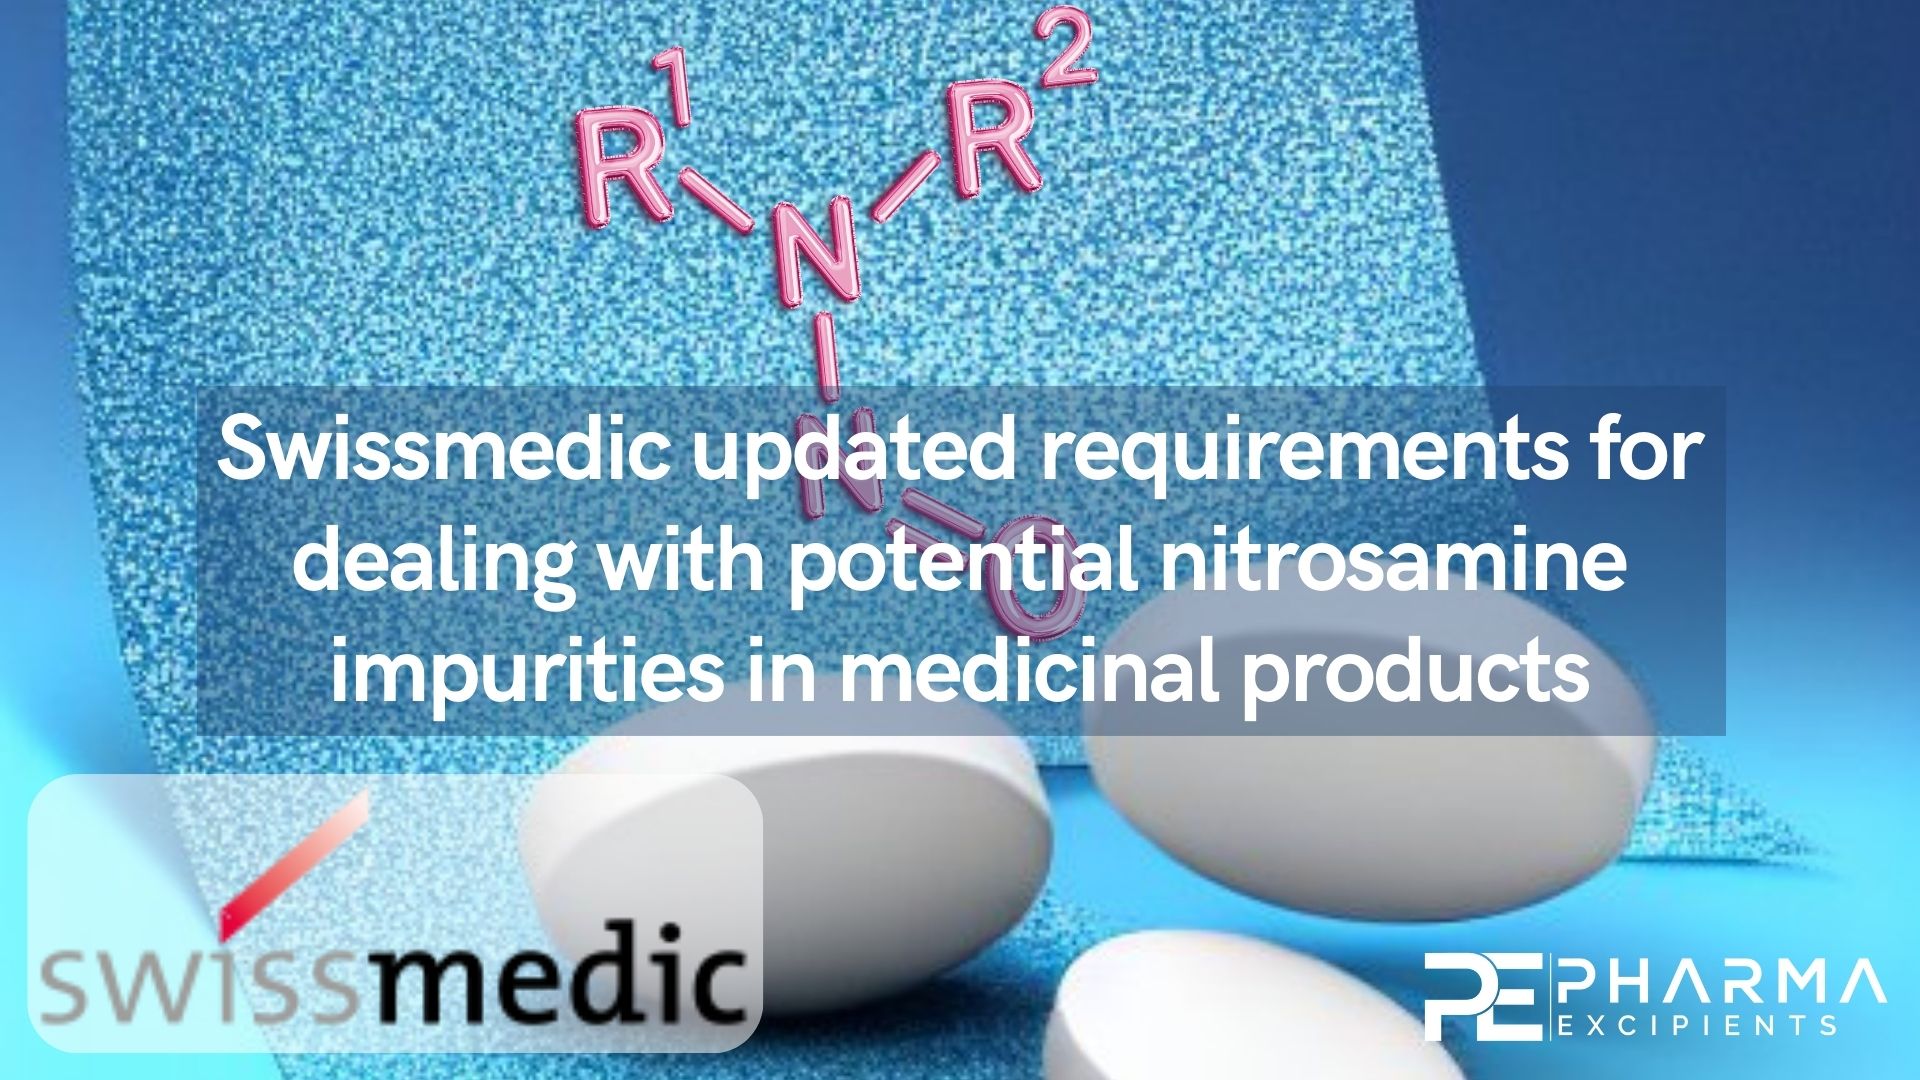 Swissmedic-updated-requirements-for-dealing-with-potential-nitrosamine-impurities-in-medicinal-products